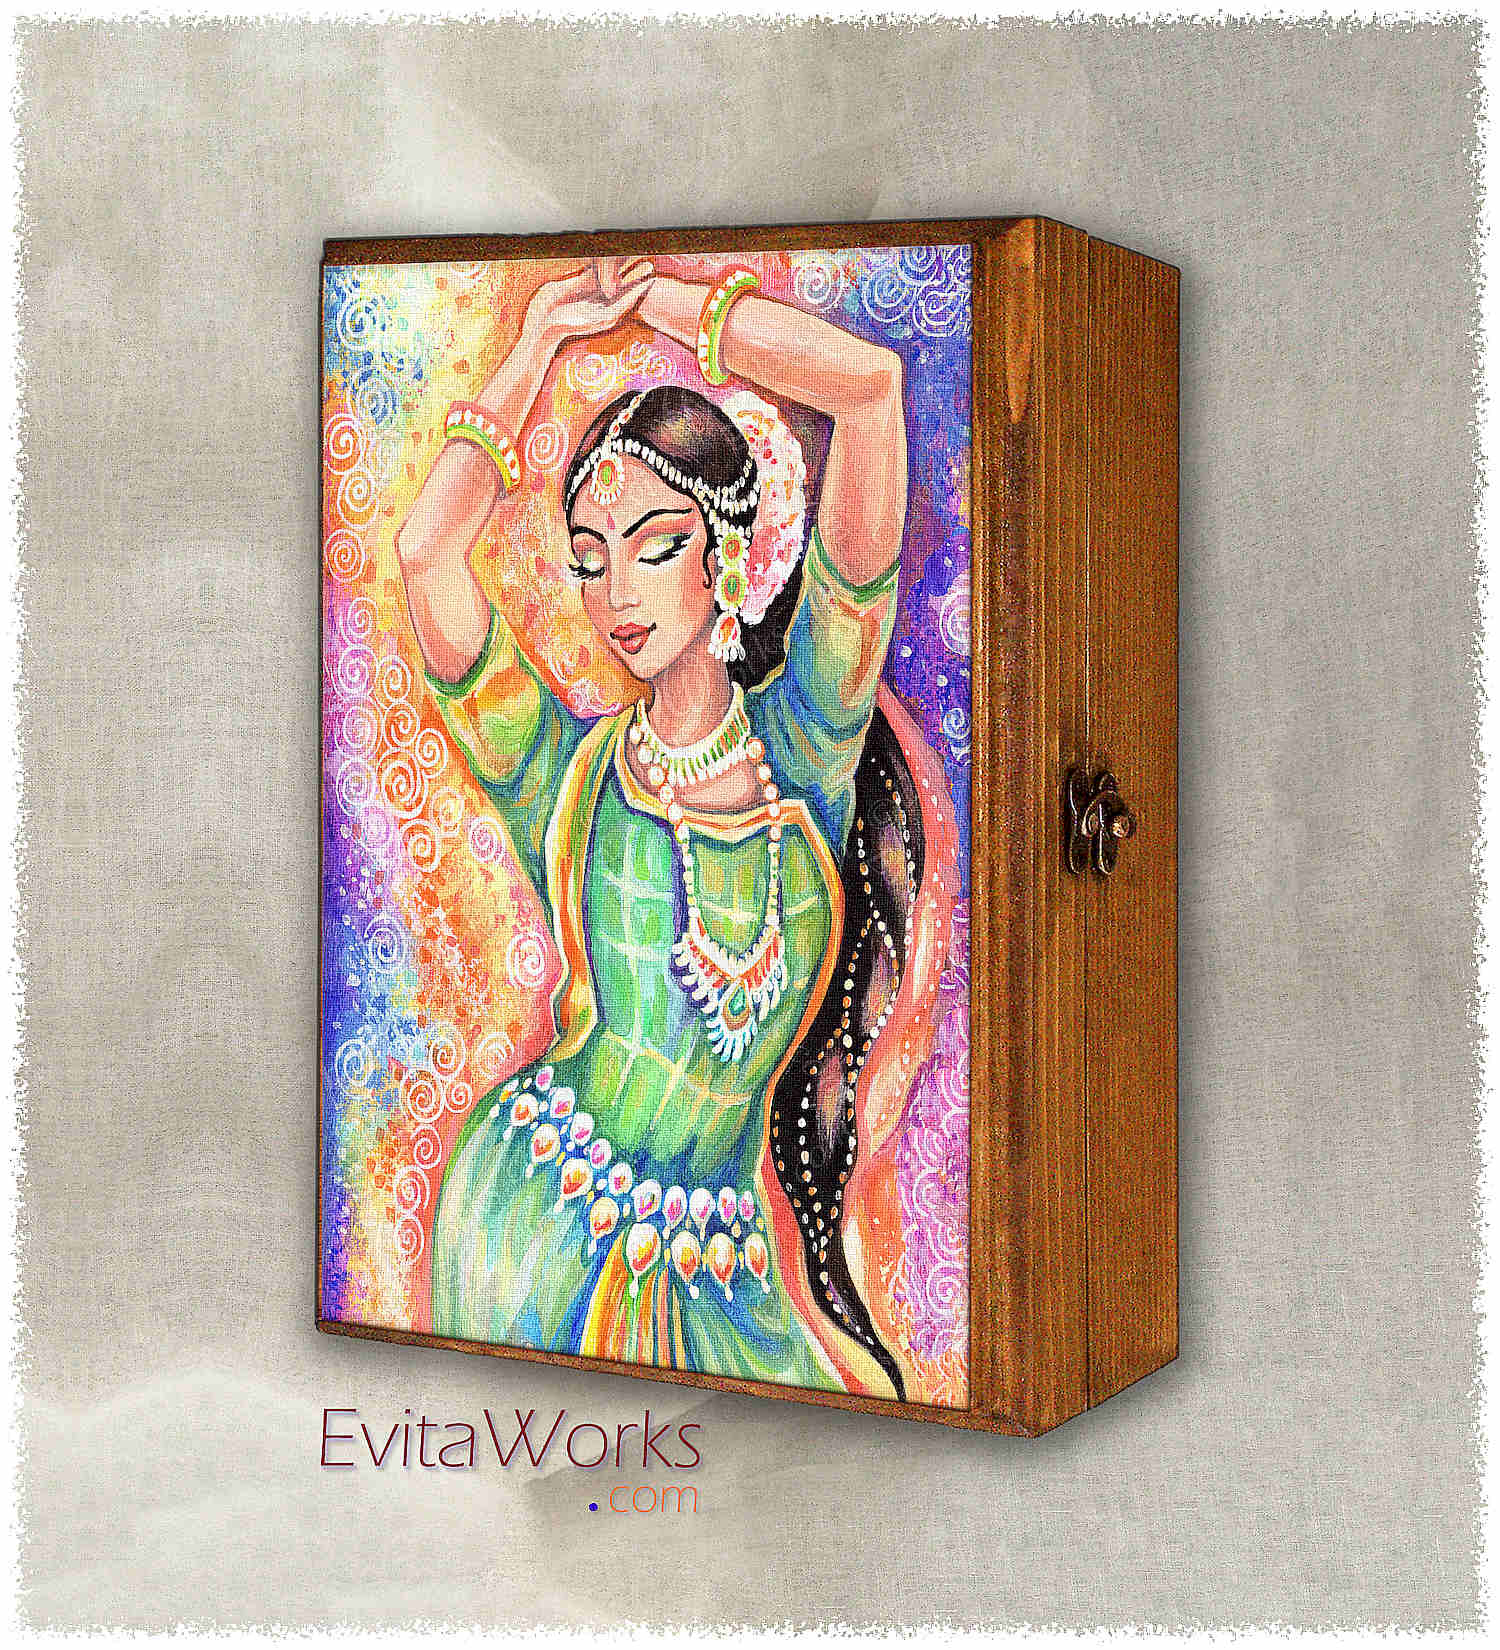 Hit to learn about "Light of Ishwari, Indian dancer" on jewelboxes